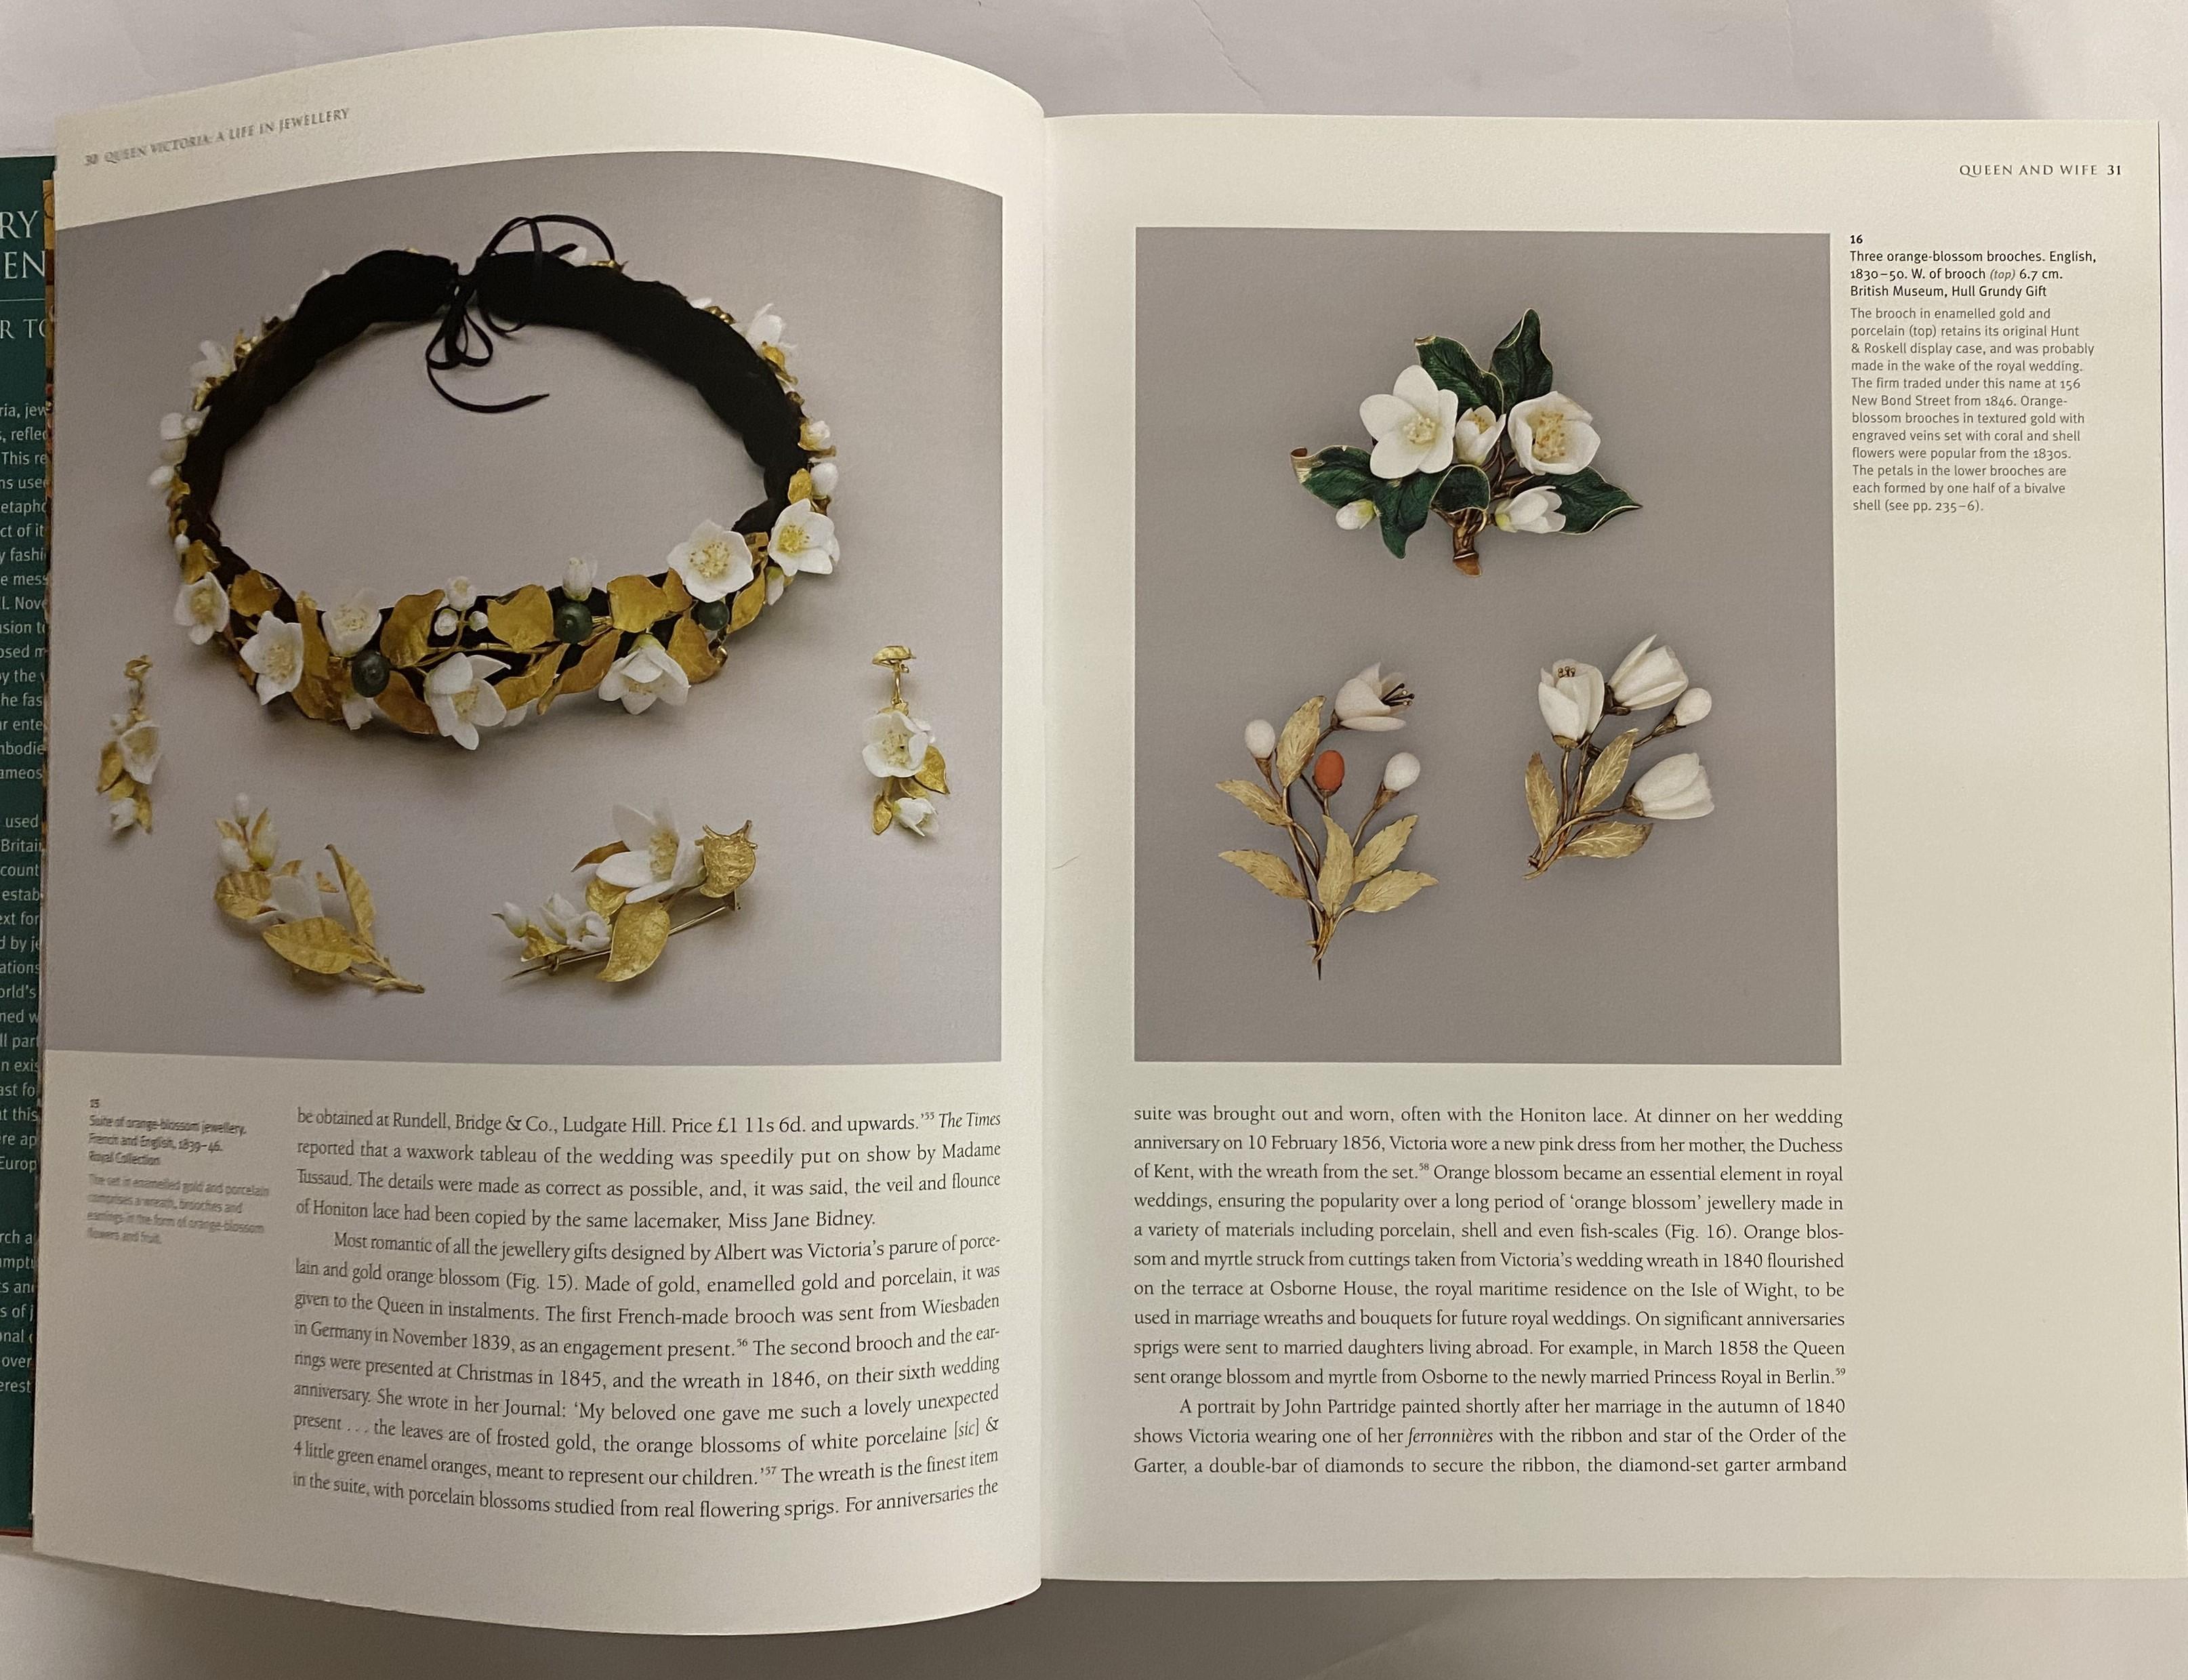 by Charlotte Gere and Judy Rudoe
This book rewrites the history of jewellery in the age of Victoria. The ‘age of Victoria’ is taken in its widest sense to encompass jewellery made throughout Europe and America, displayed at the great international